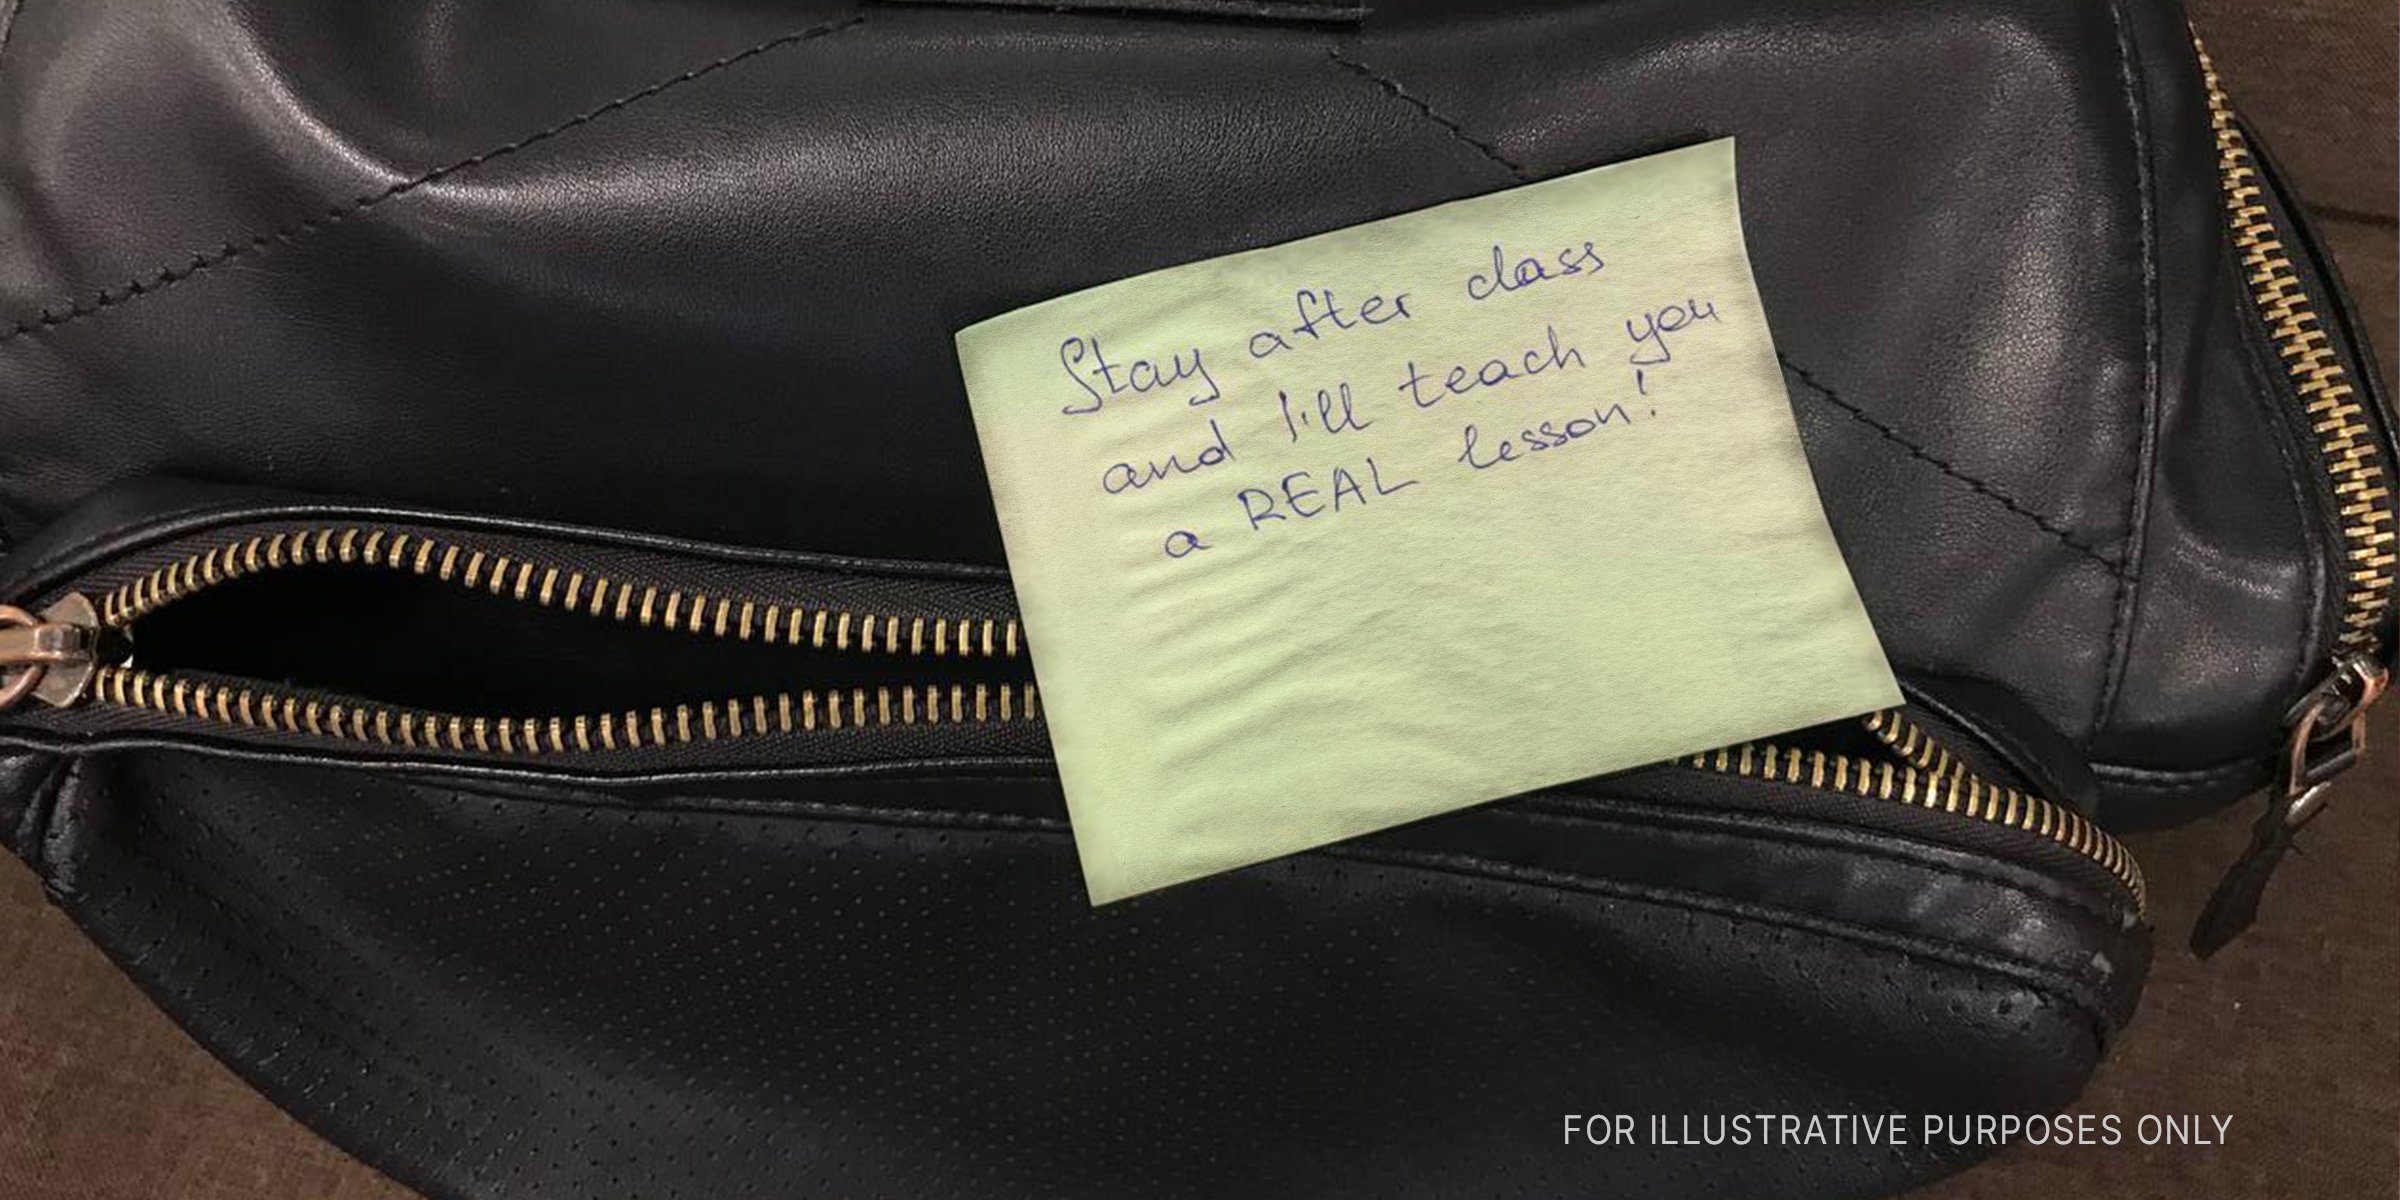 A note left on a backpack | Source: AmoMama